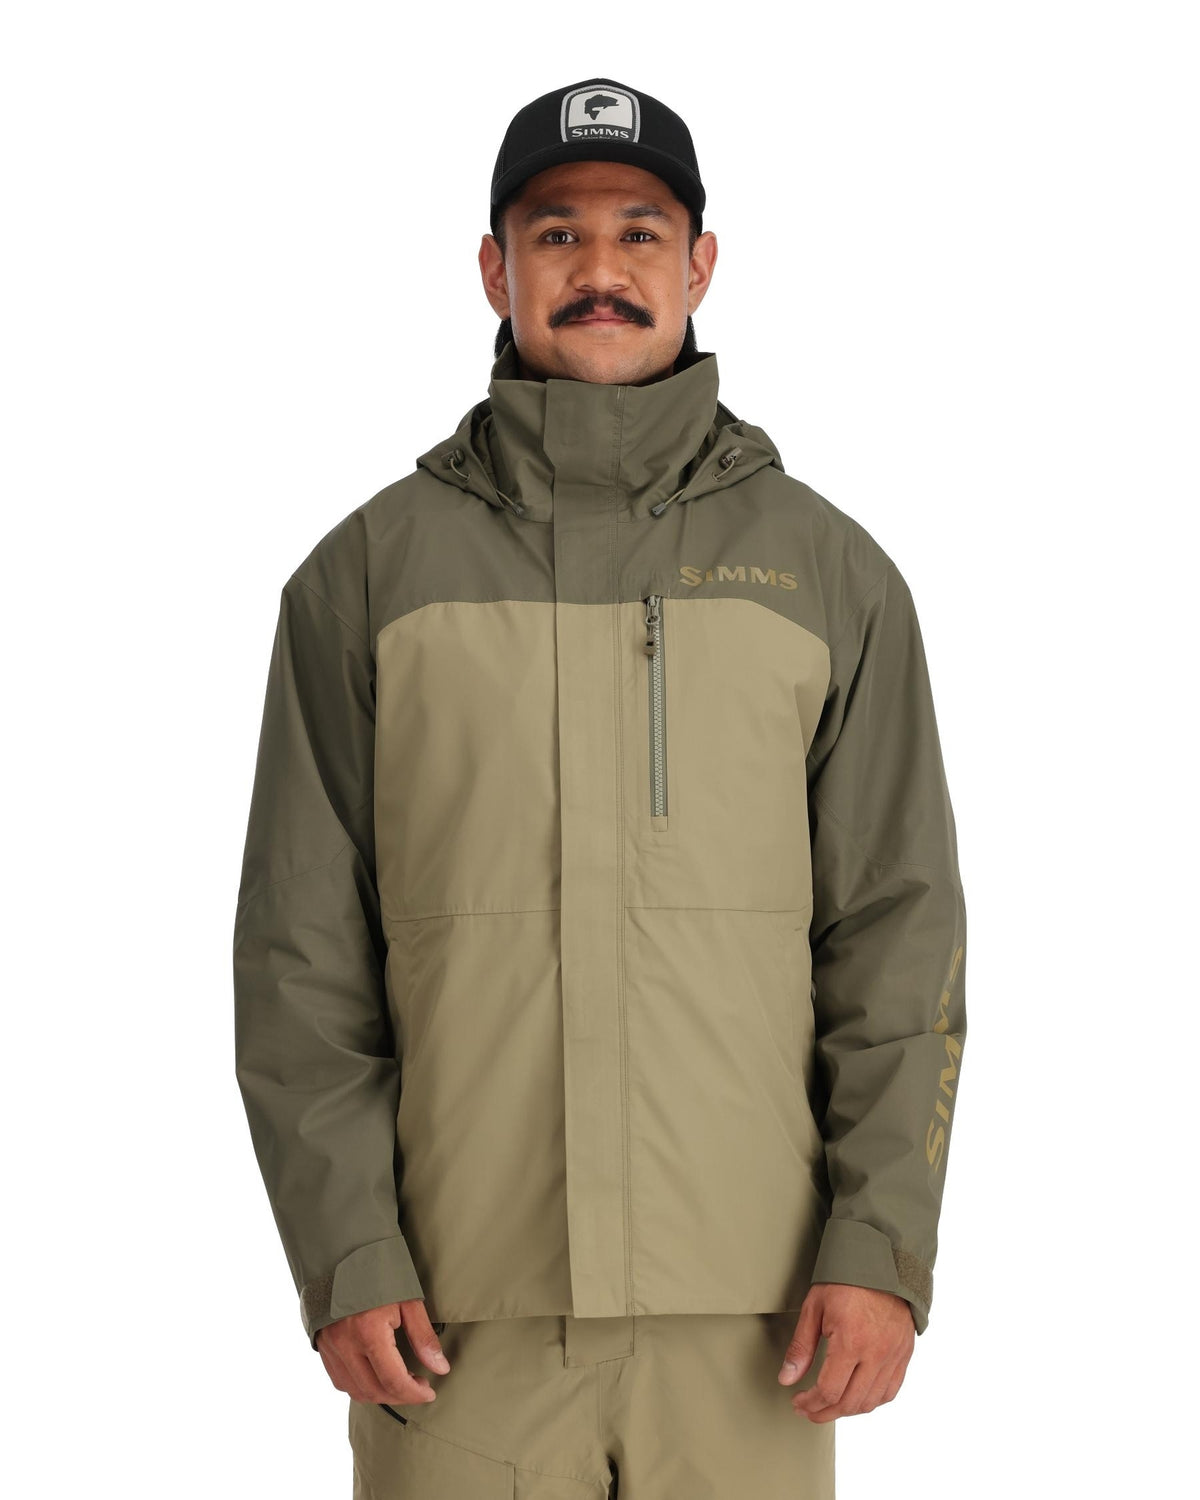 Simms Challenger Fishing Jacket 2023 (13675) - Regiment Camo Olive Drab ( Large - 2XL)